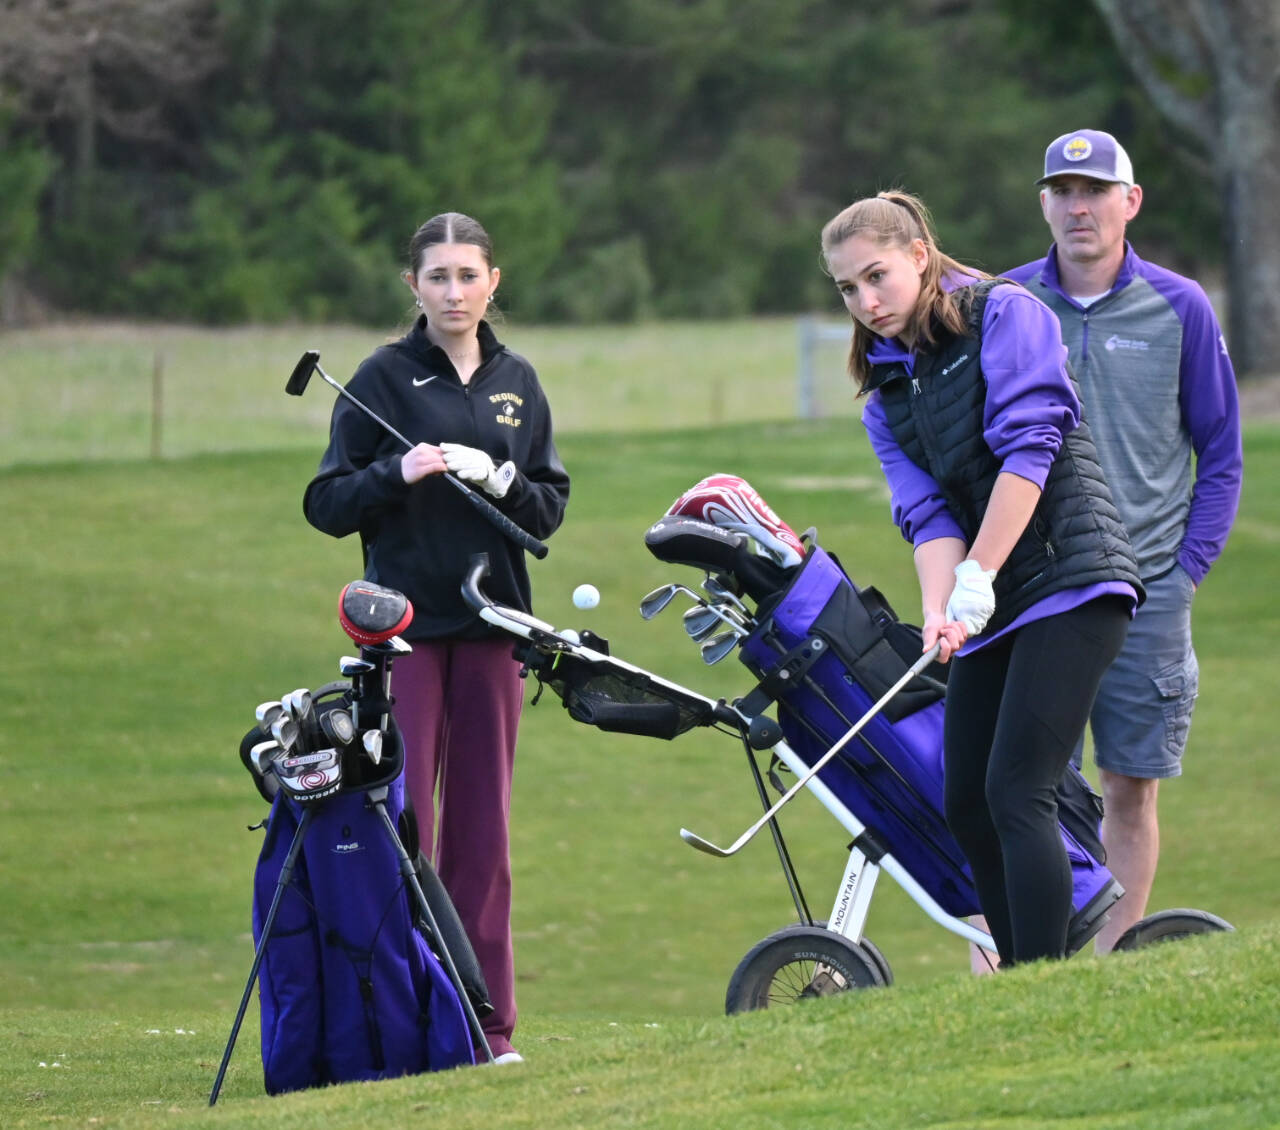 Sequim Gazette photo by Michael Dashiell
With teammate Kendra Dodson and assistant coach Darren Stephens looking on, Taryn Johnson chips a shot onto the green on the third hole at The Cedars at Dungeness in a March 21 match against Bainbridge.